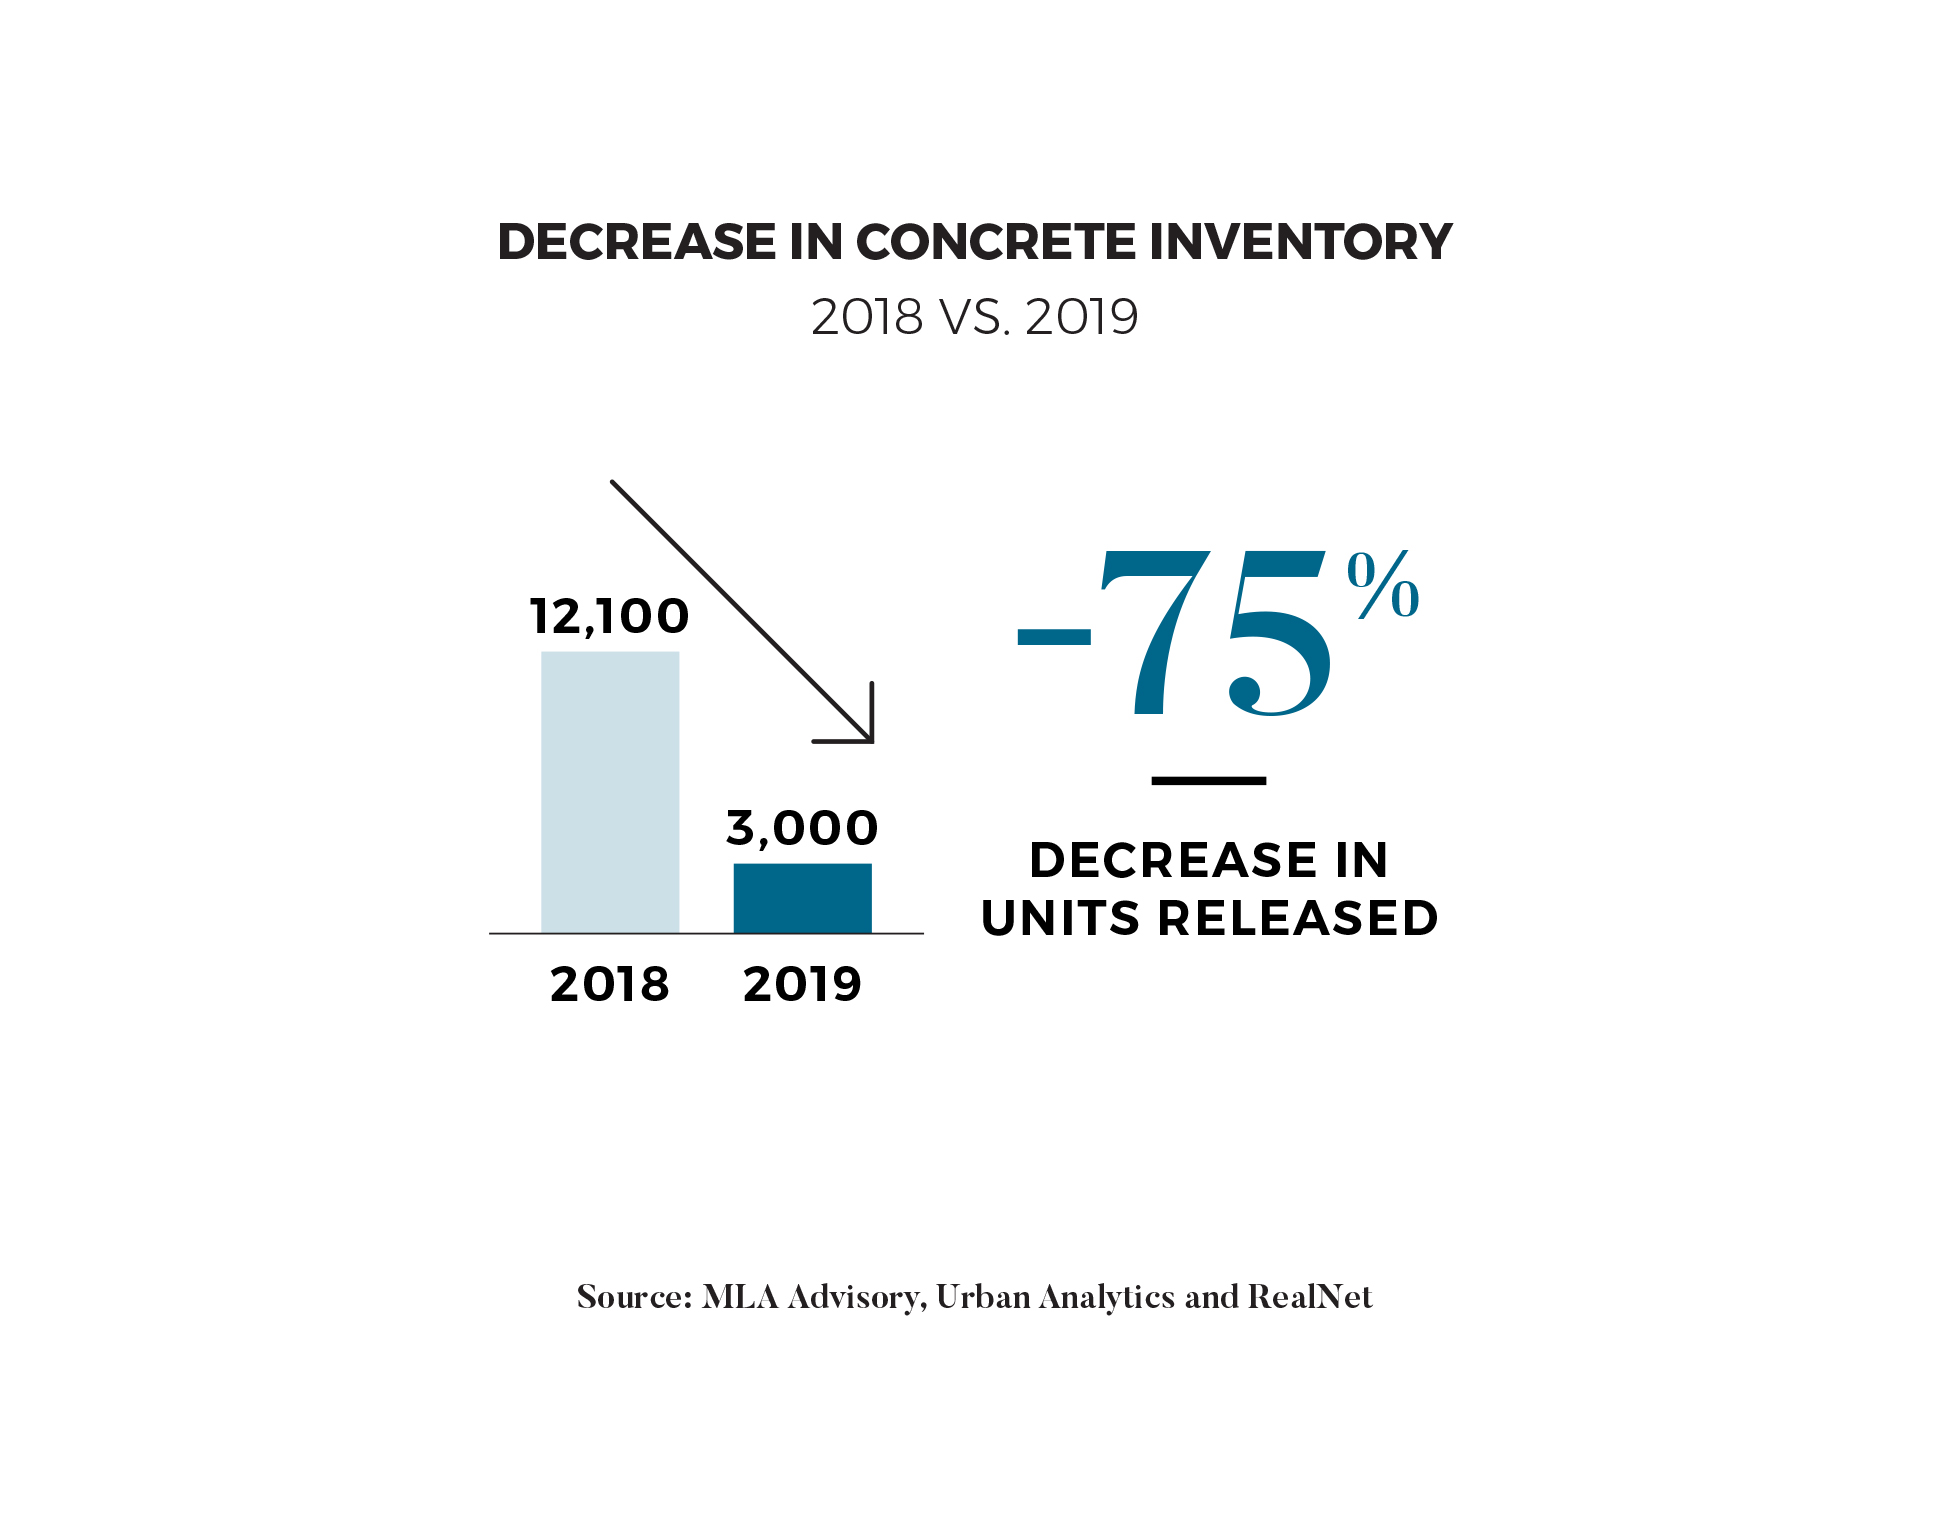 2019 TO SEE THE FEWEST NUMBER OF CONCRETE PROJECT LAUNCHES IN 5+ YEARS